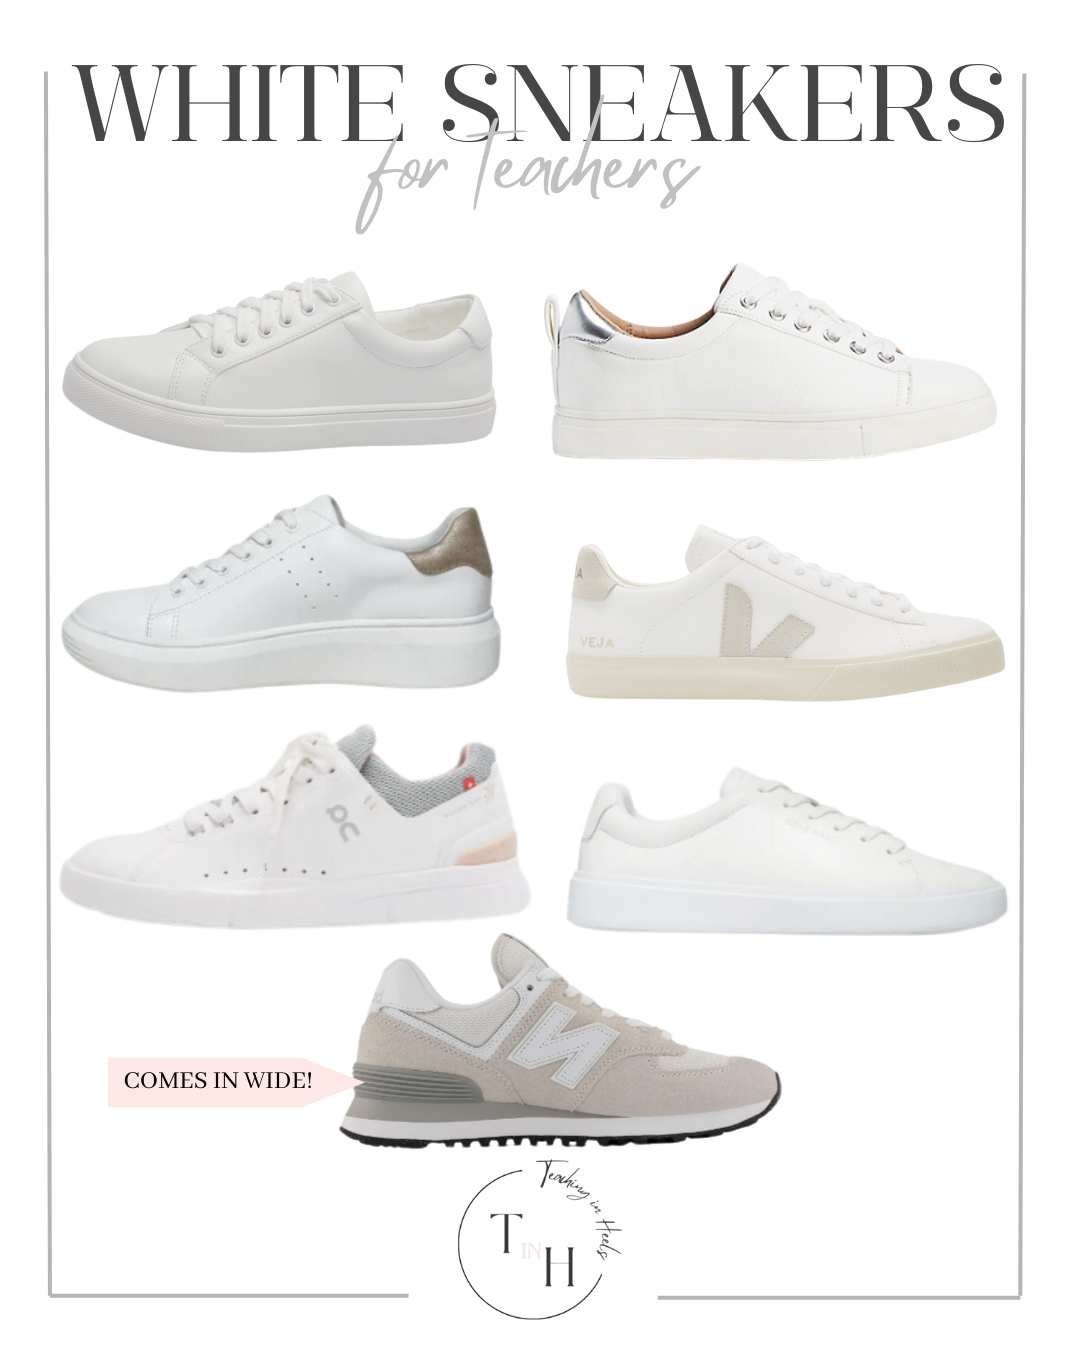 #teachersneakers #sneakers #looks #sneakers #outfit #styleguide #comfy #shoes #teacher 